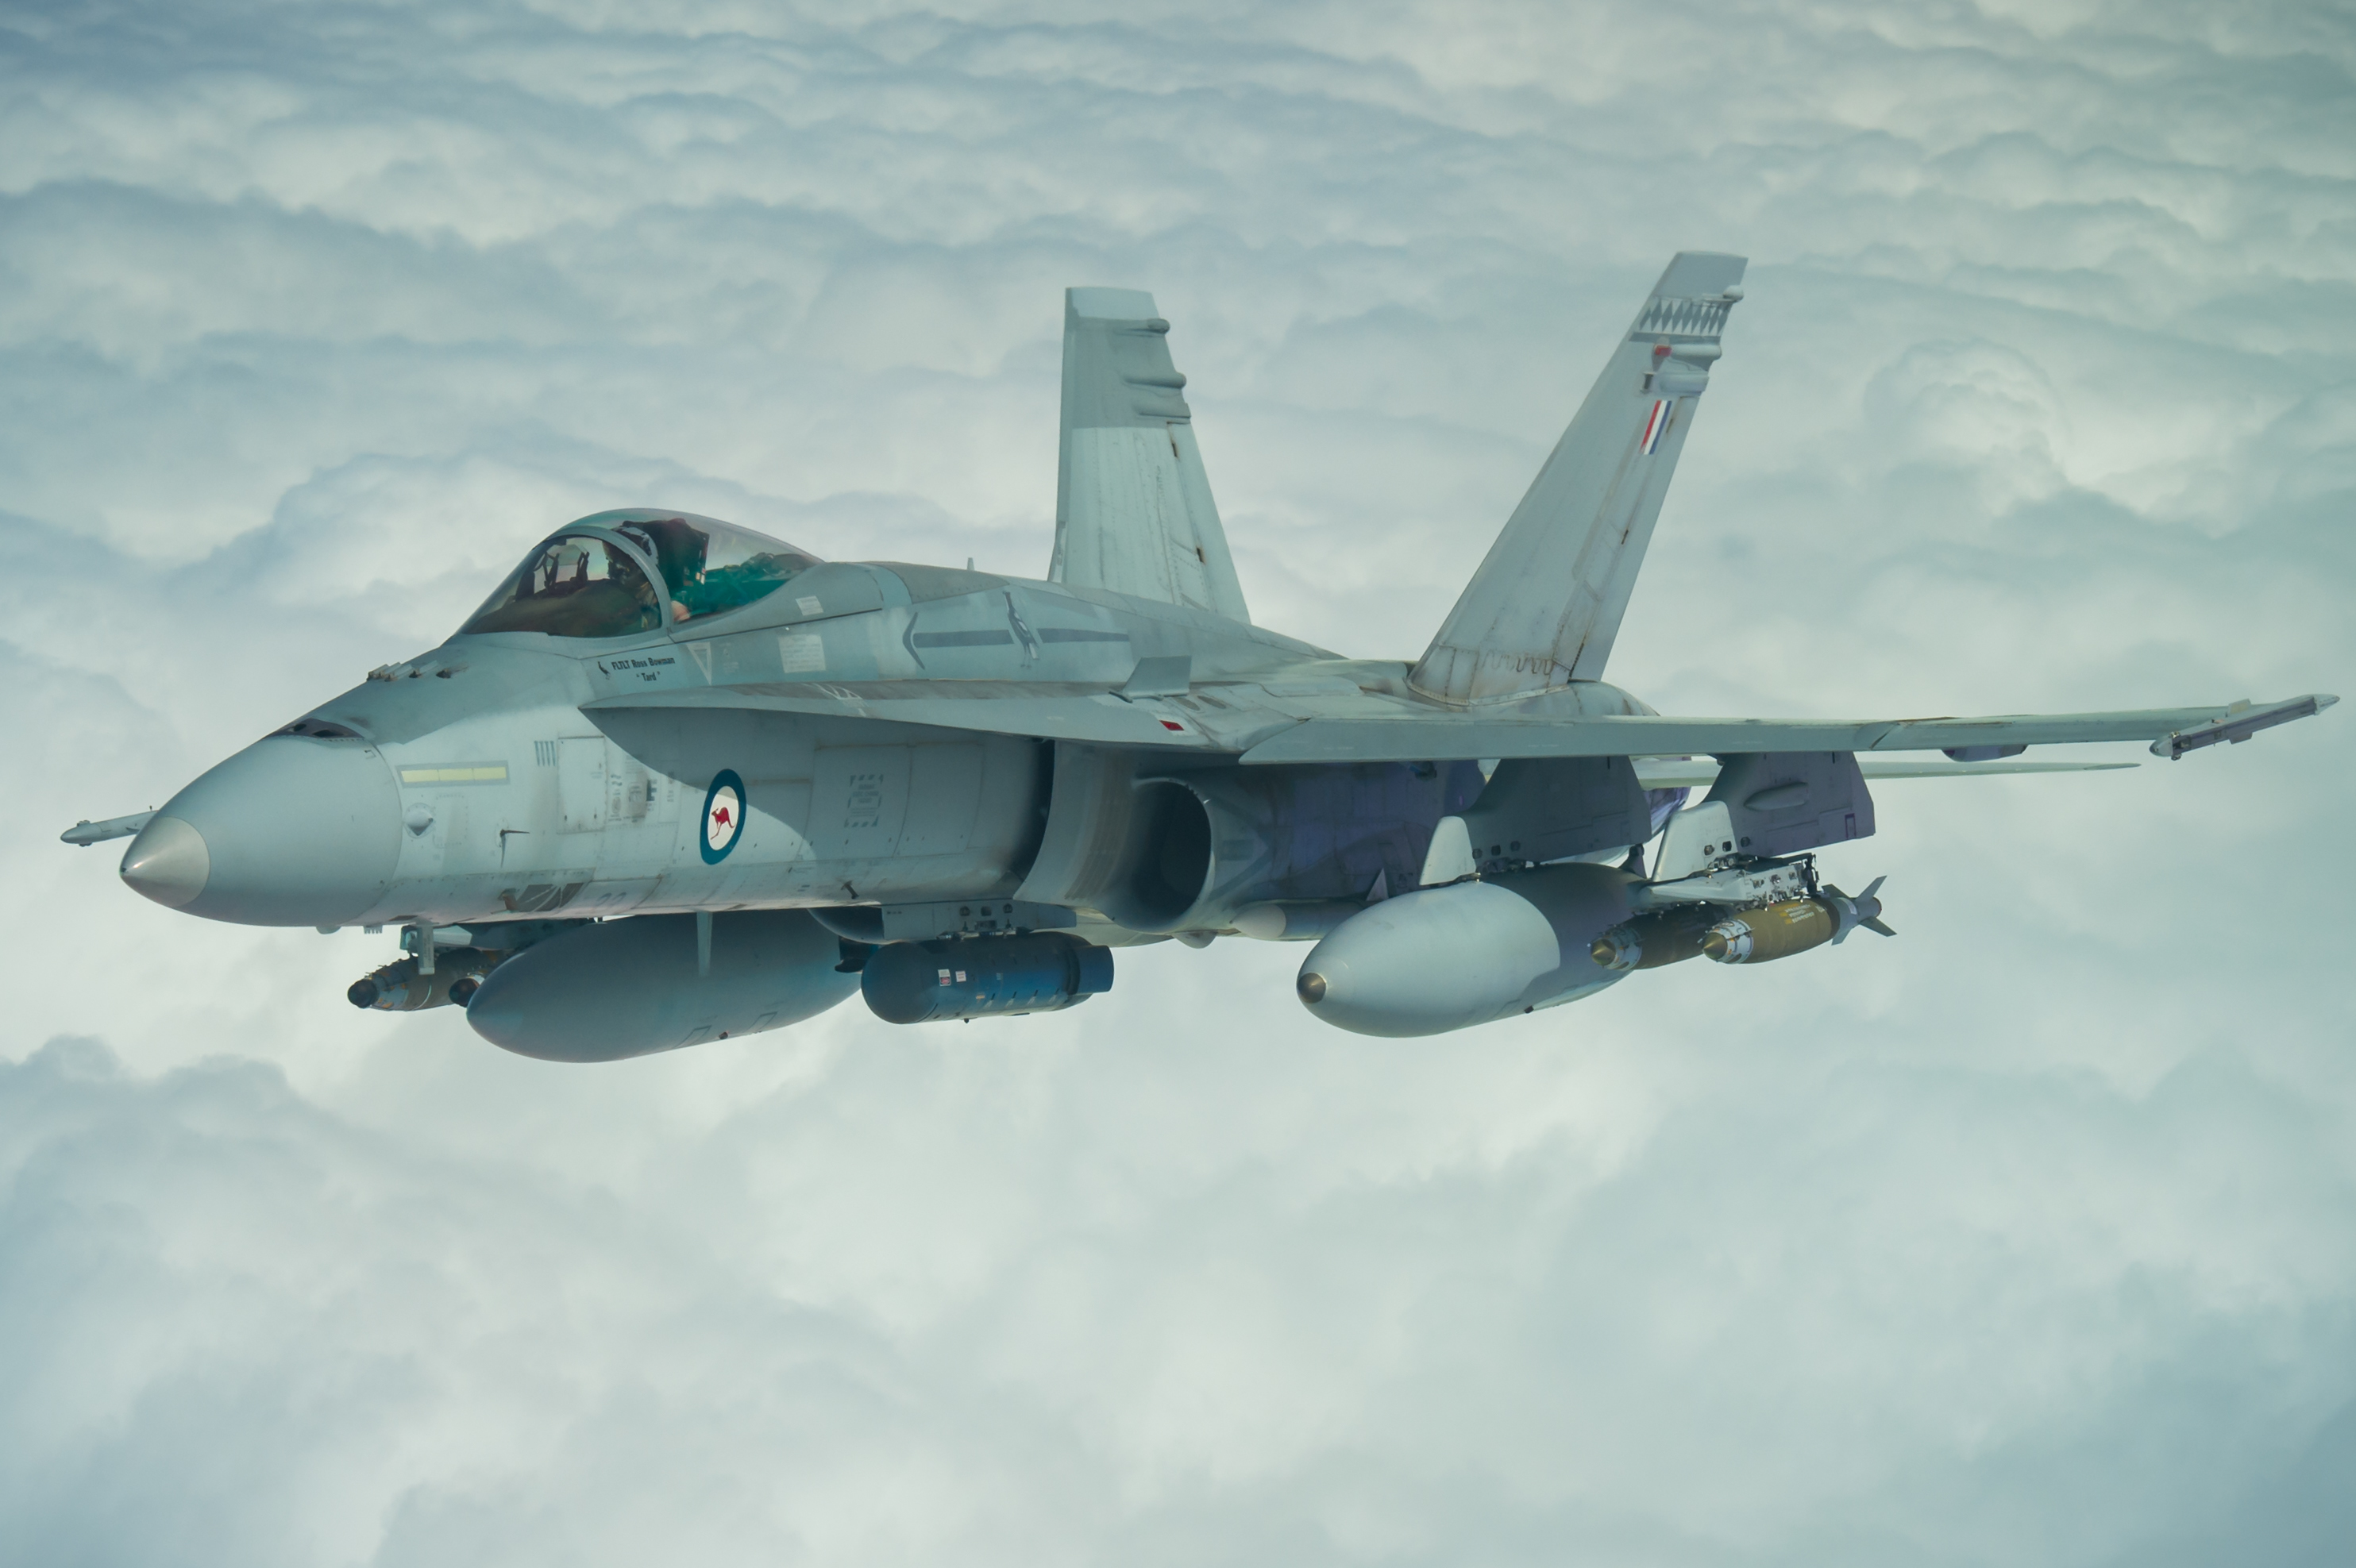 A Royal Australian Air Force F/A-18A Hornet receives fuel from a U.S. Air Force KC-10 Extender while flying a mission in support of Operation Okra over Iraq, March 22, 2017. The RAAF is supporting Combined Joint Task Force-Operation Inherent Resolve through Operation Okra. Since operations commenced in 2014, the F/A-18A Hornets and F/A-18F Super Hornets have flown more than 12,000 hours during more than 2,000 sorties and delivered more than 1,600 munitions. (U.S. Air Force photo/Senior Airman Tyler Woodward)